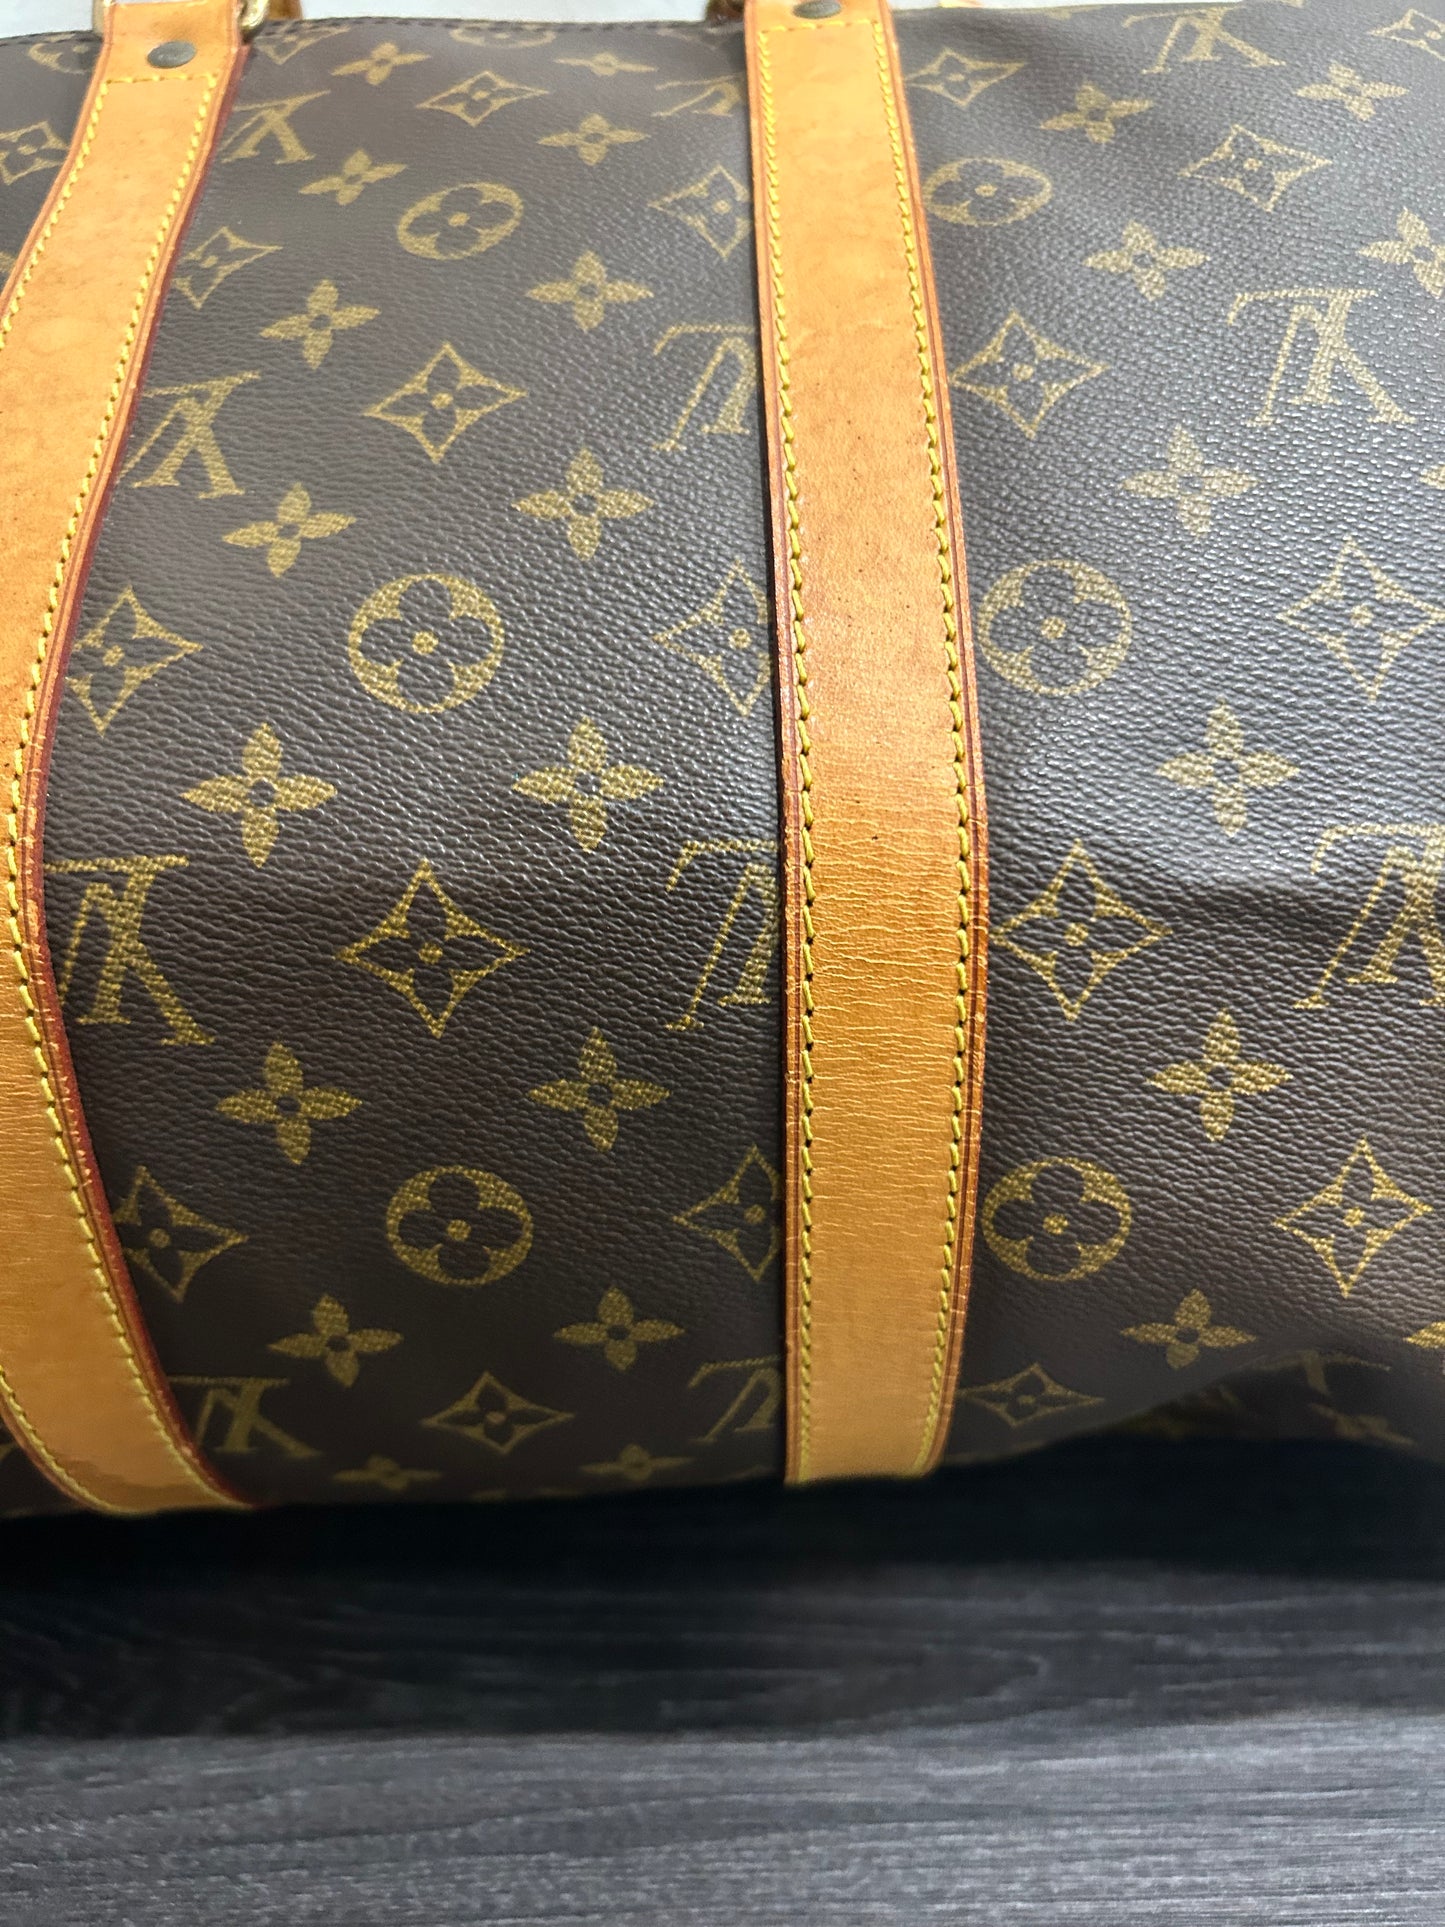 BUY NOW (50% Off for Subscribers) Louis Vuitton Monogram Keepall 45